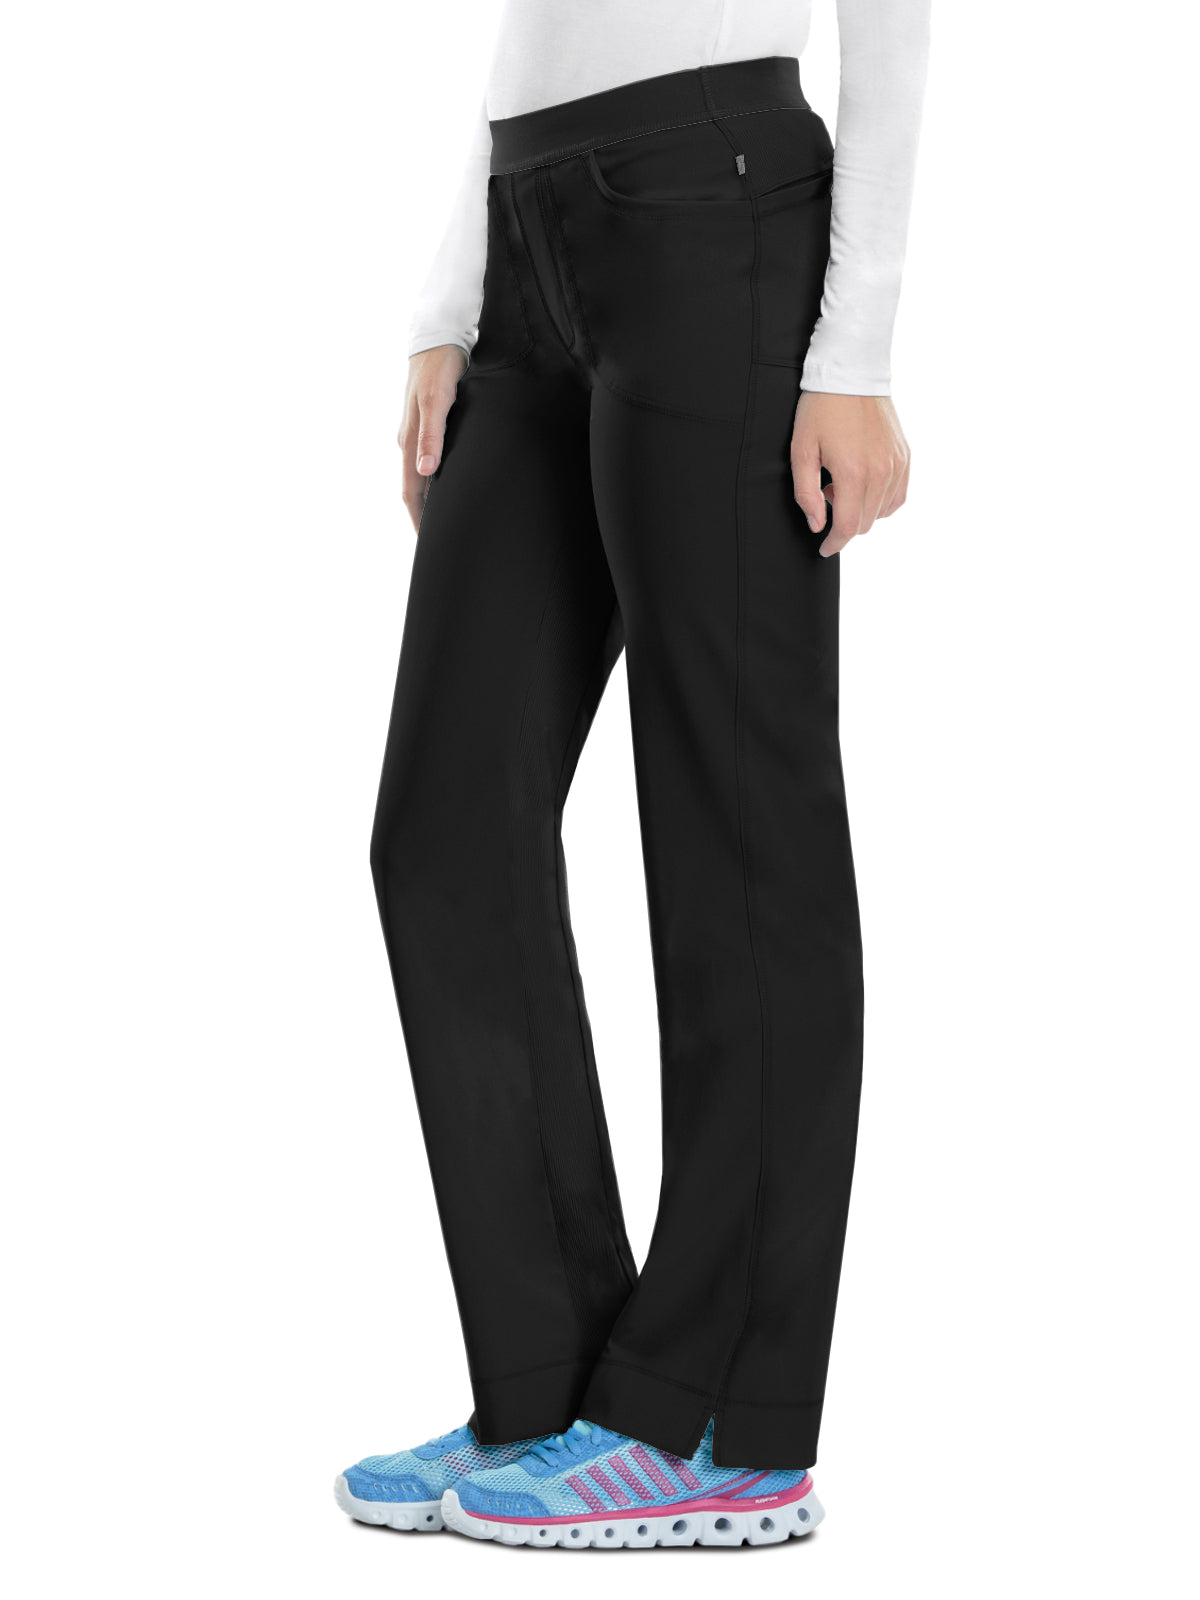 Low Rise Soft Elastic Waistband Slim Pull-On Pant - 1124A - Black